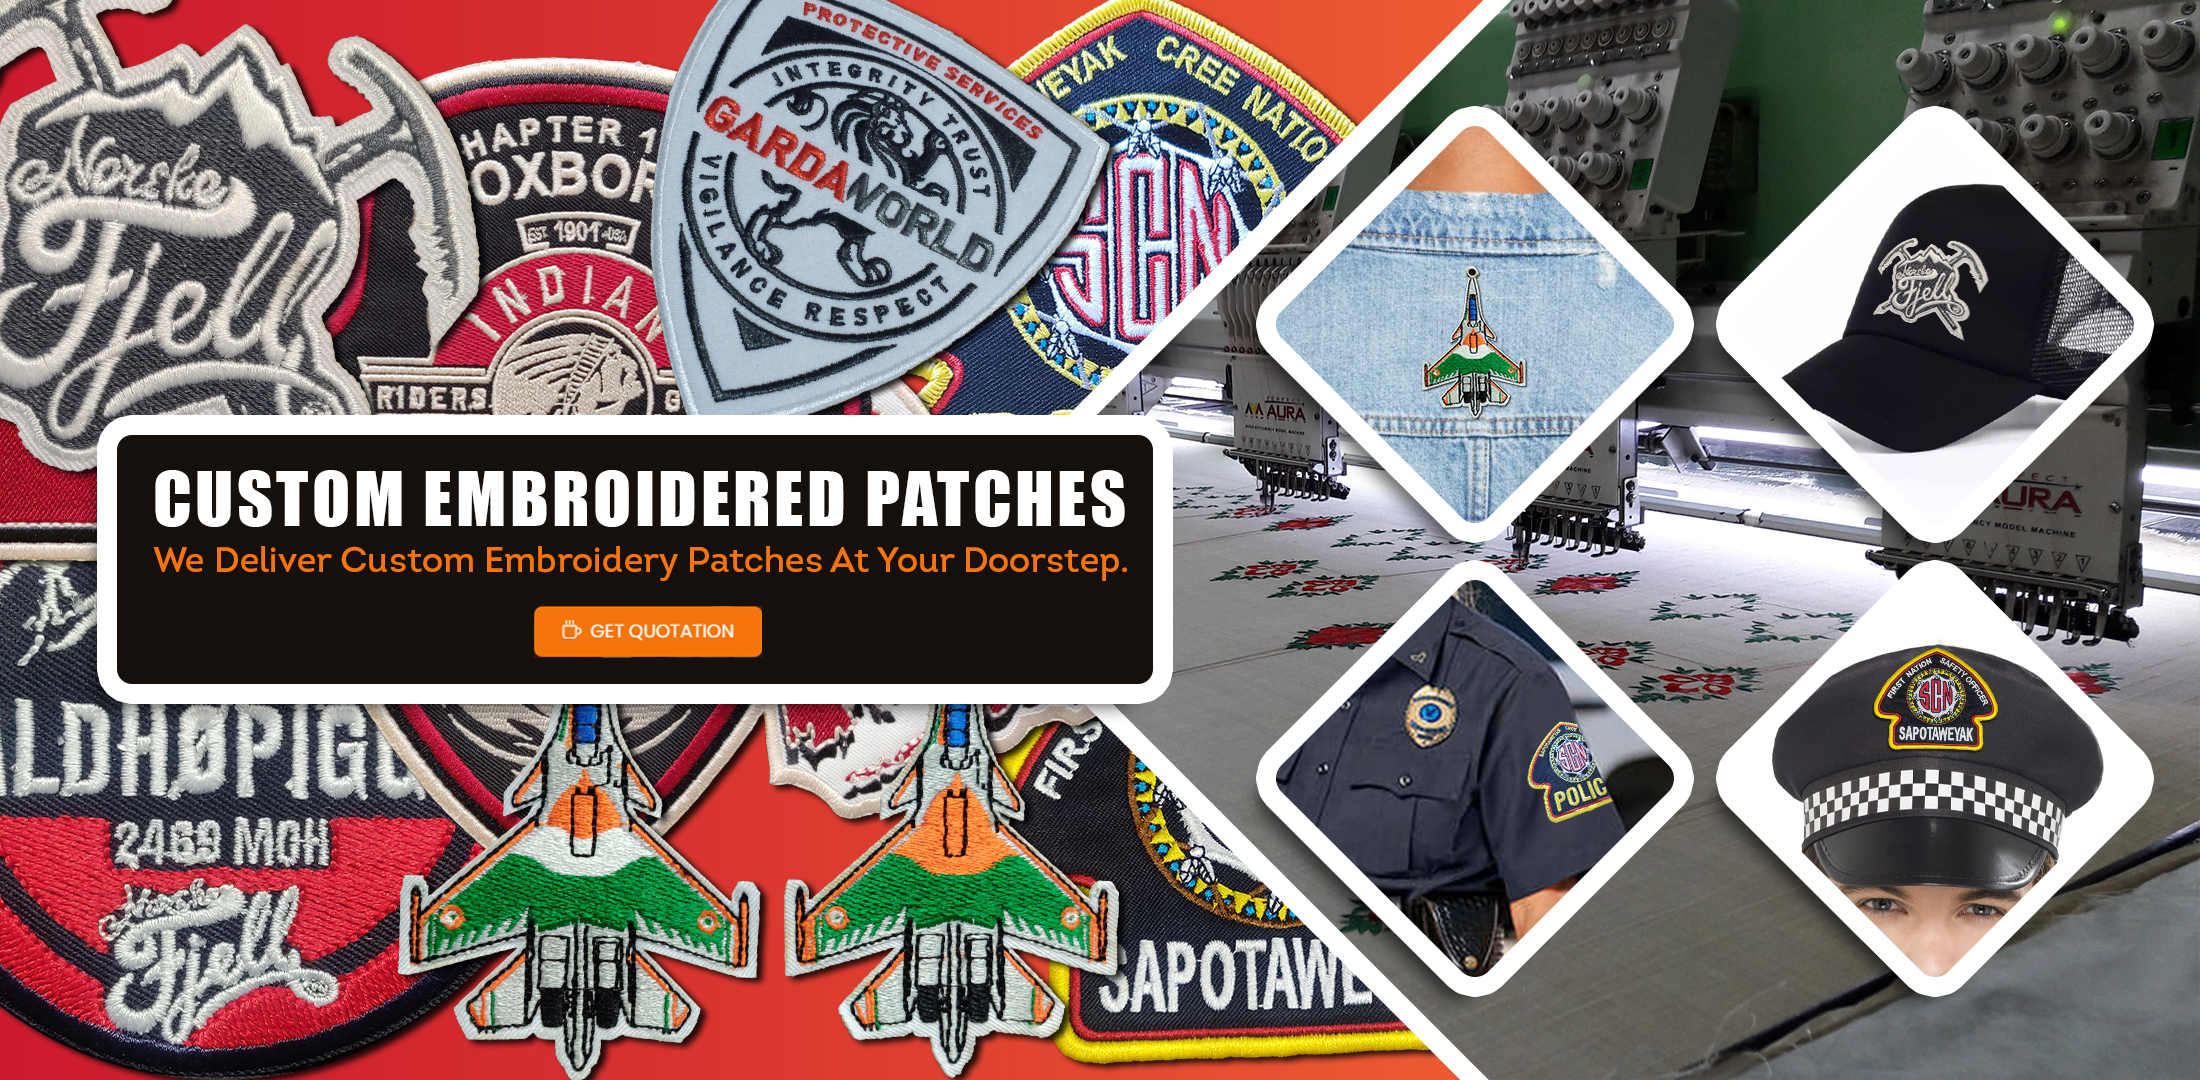 How to Make Custom Embroidery Patches